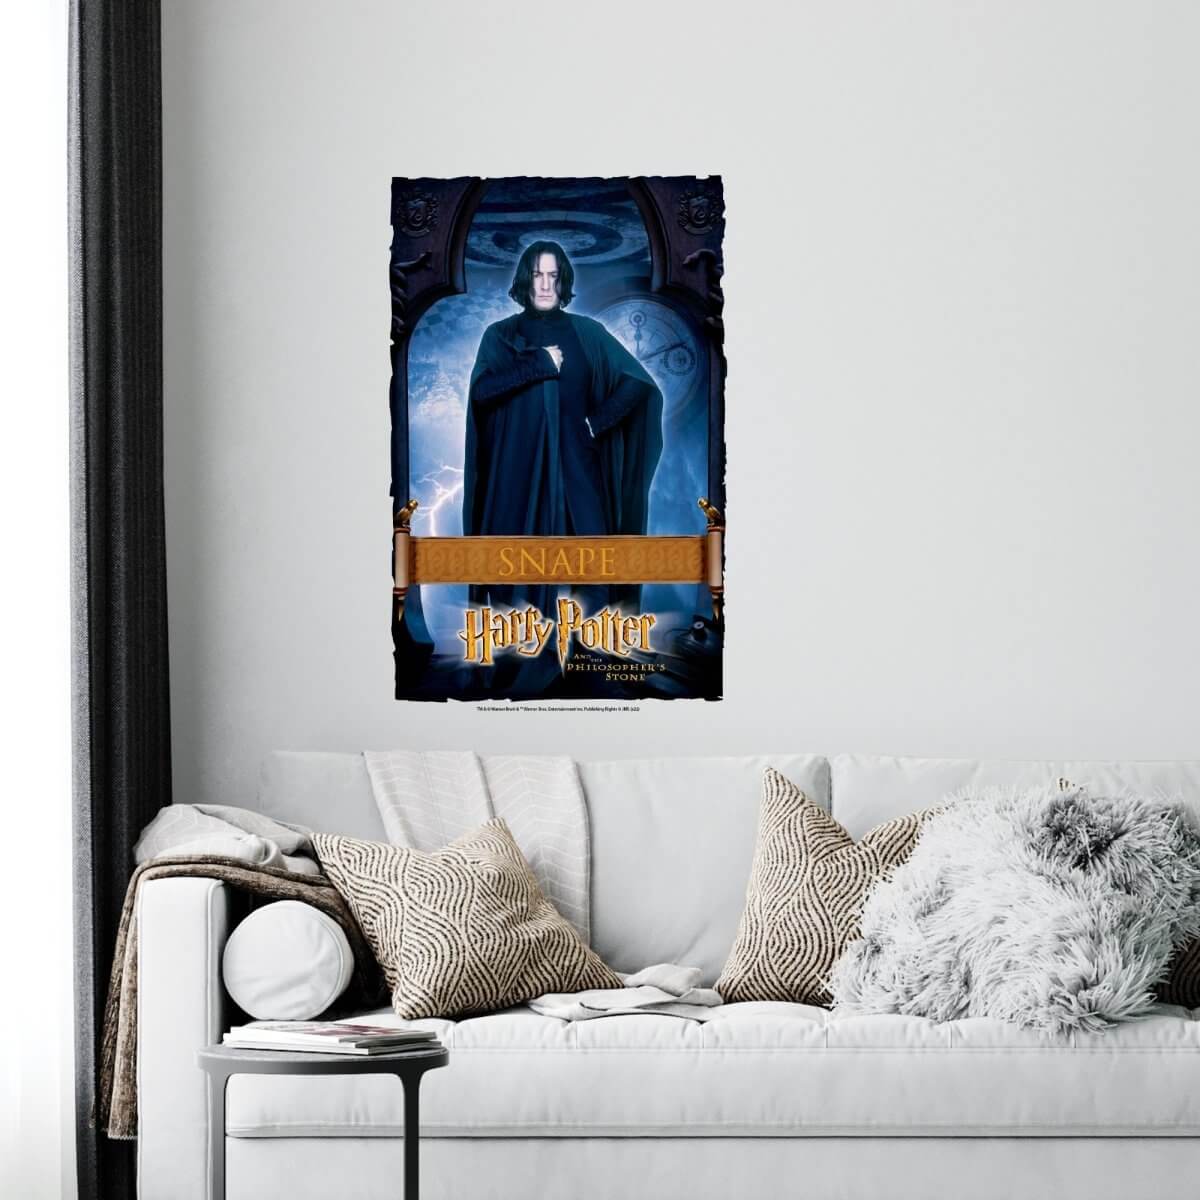 Kismet Decals Harry Potter Snape Poster Licensed Wall Sticker - Easy DIY Home & Kids Room Decor Wall Decal Art - Kismet Decals